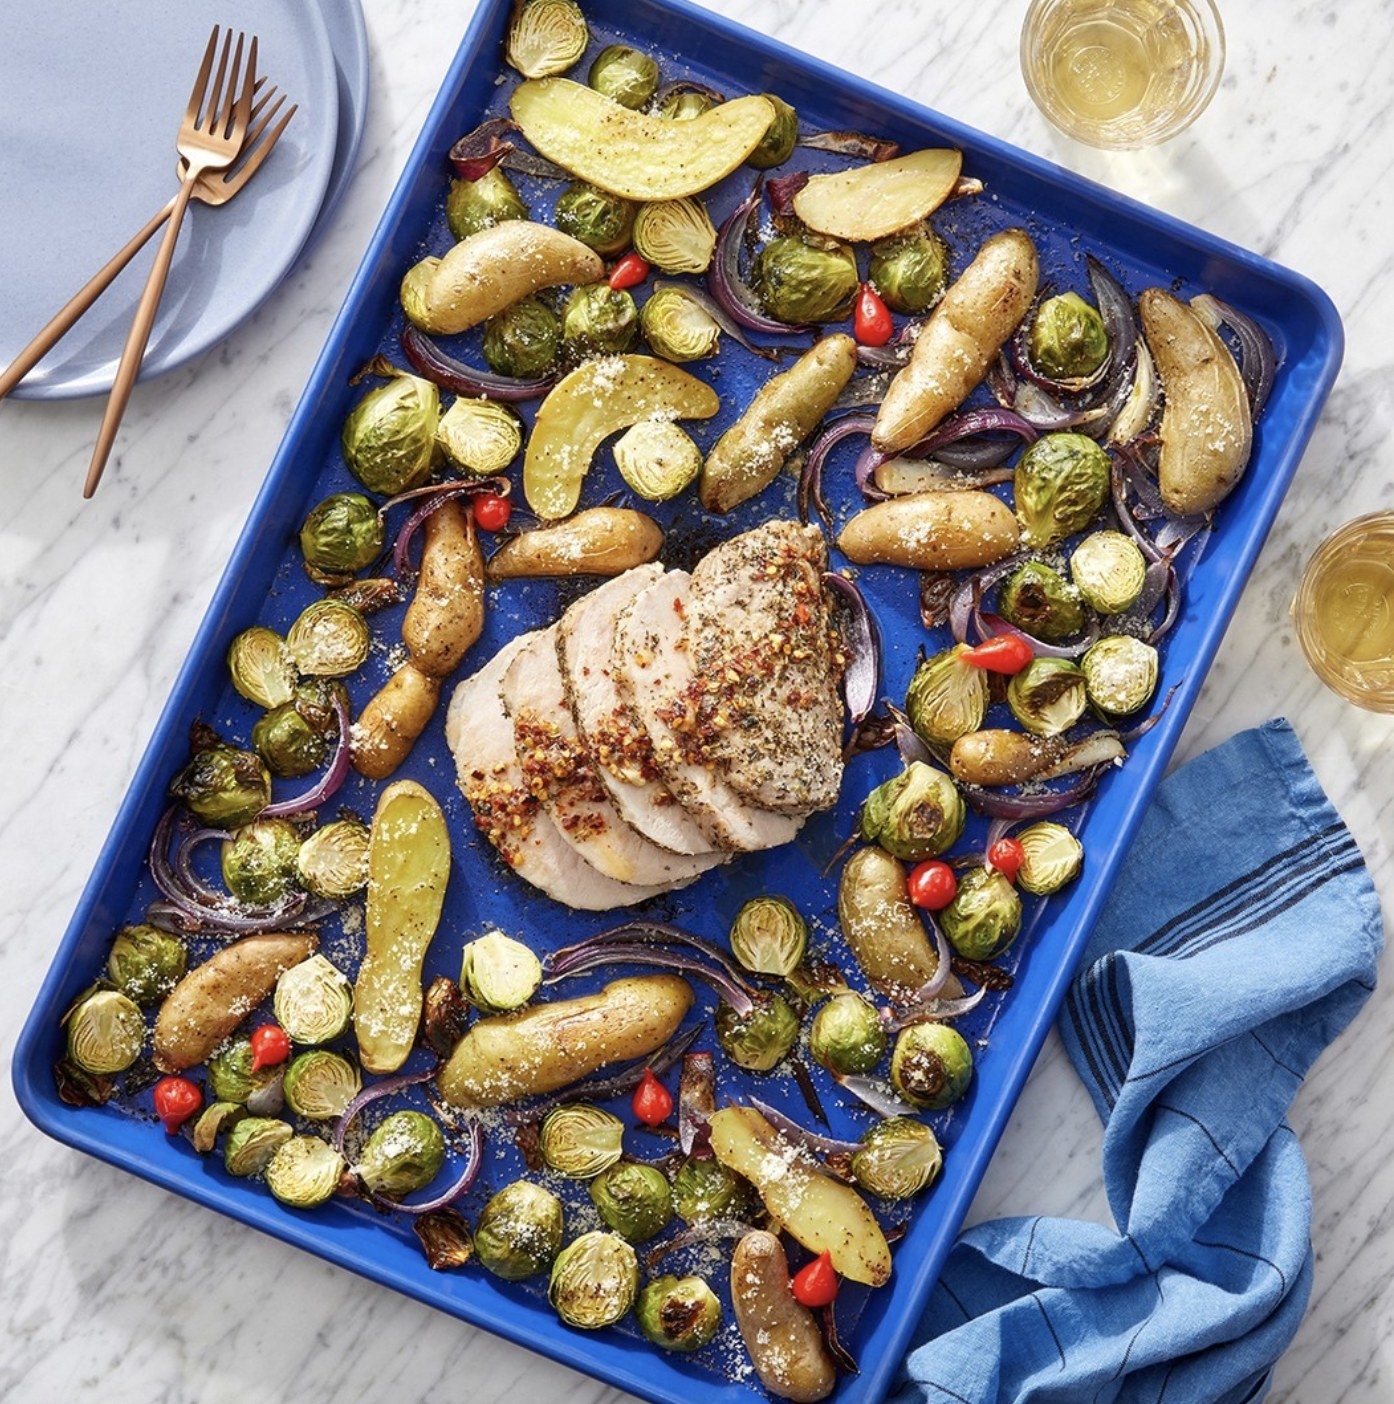 A sheet pan of roasted veggies and potatoes with chicken in center